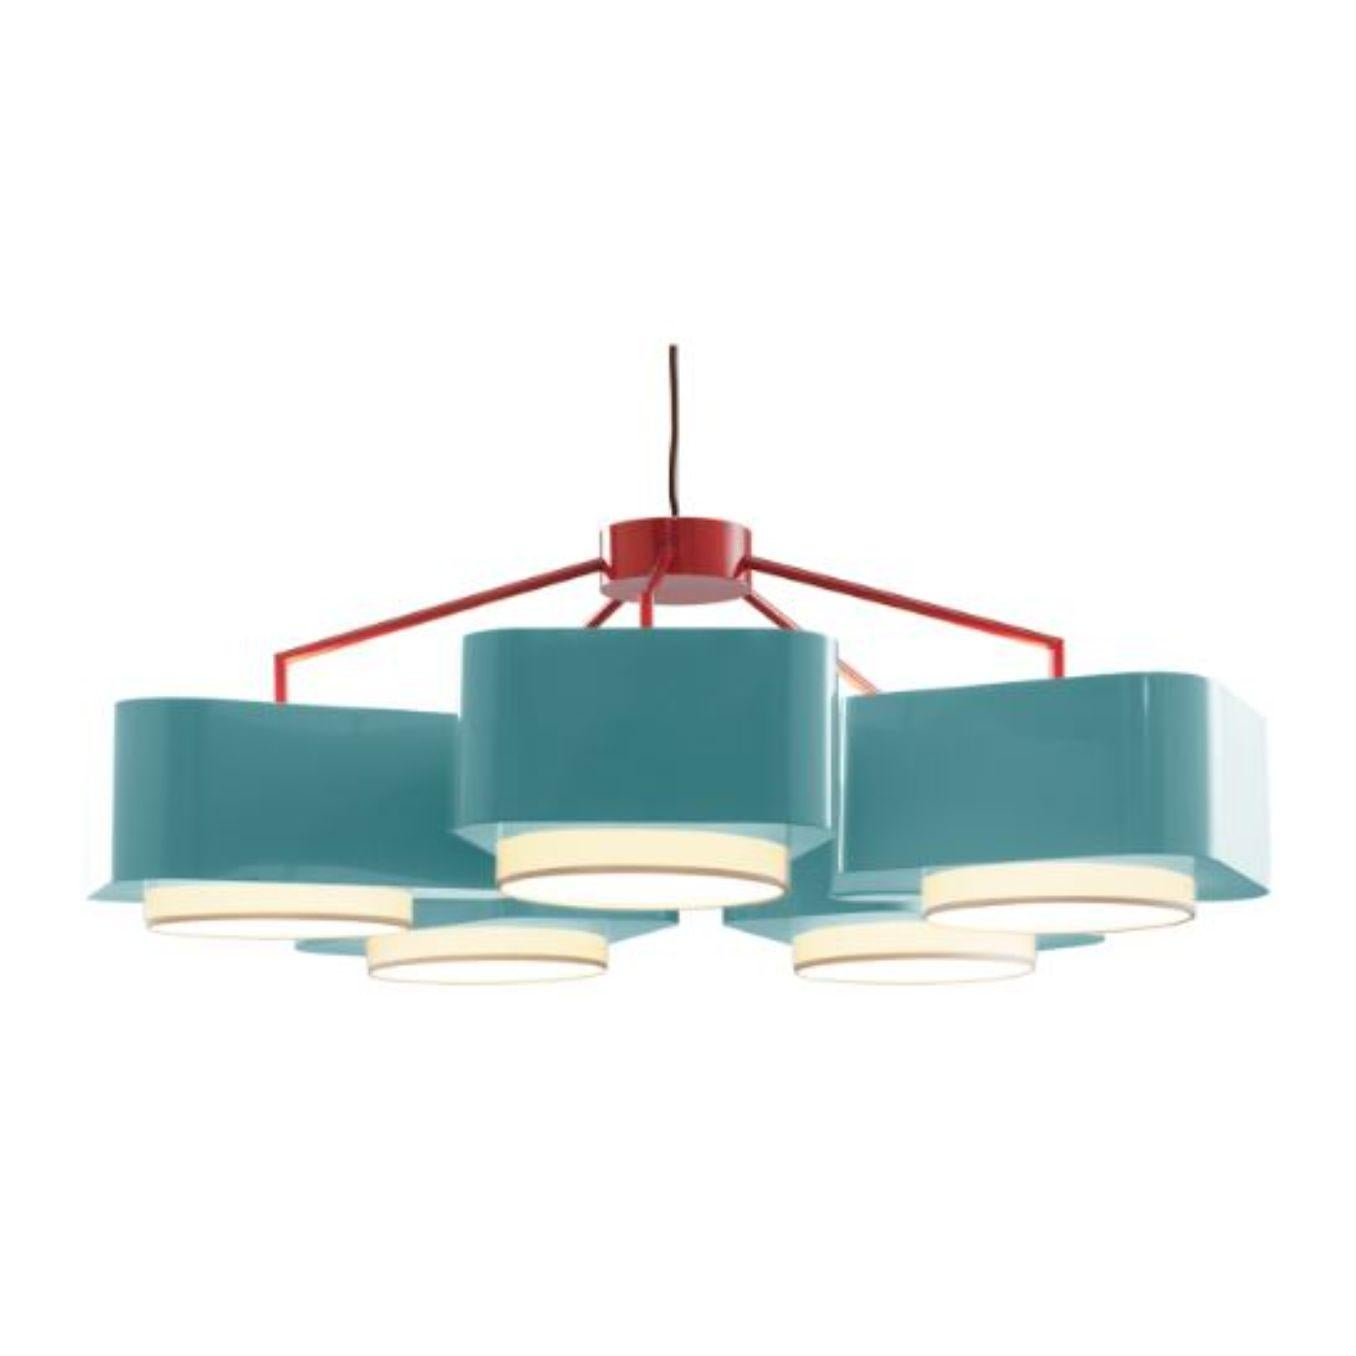 Portuguese Mint and Dream Carousel Suspension Lamp by Dooq For Sale